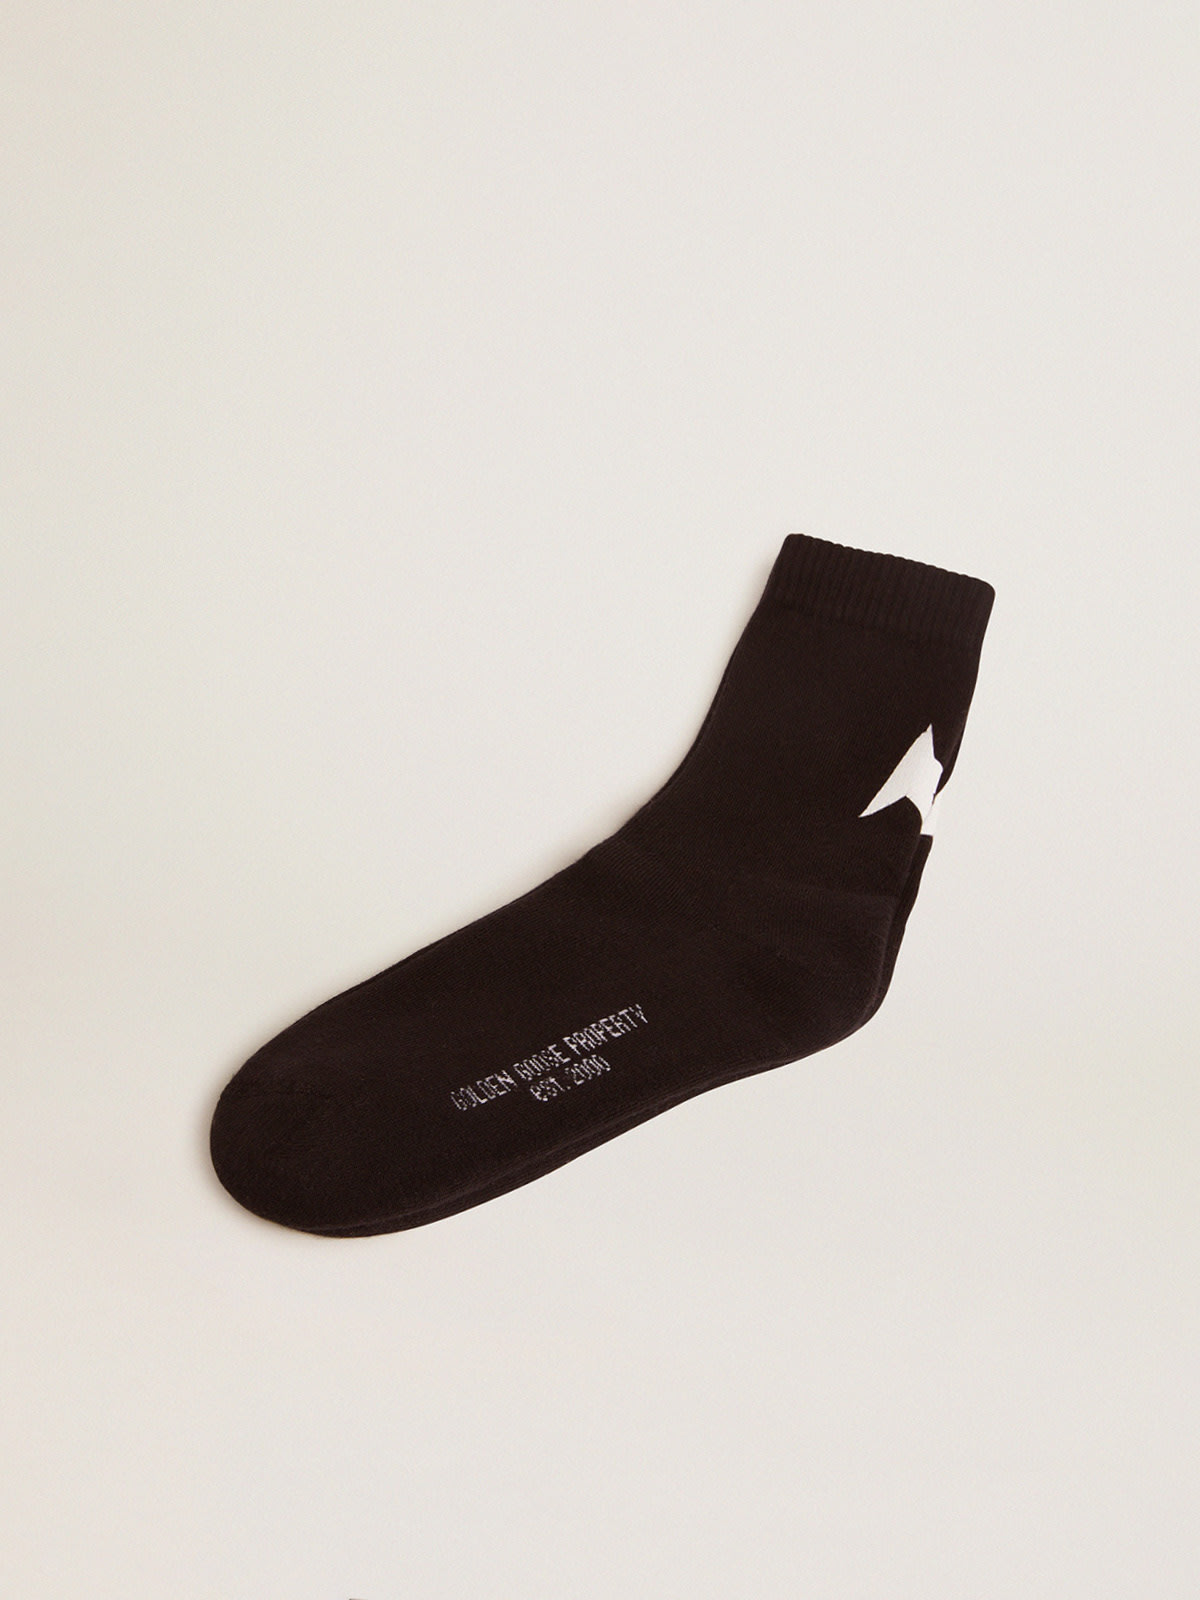 Golden Goose - Black Star Collection socks with contrasting white star in 